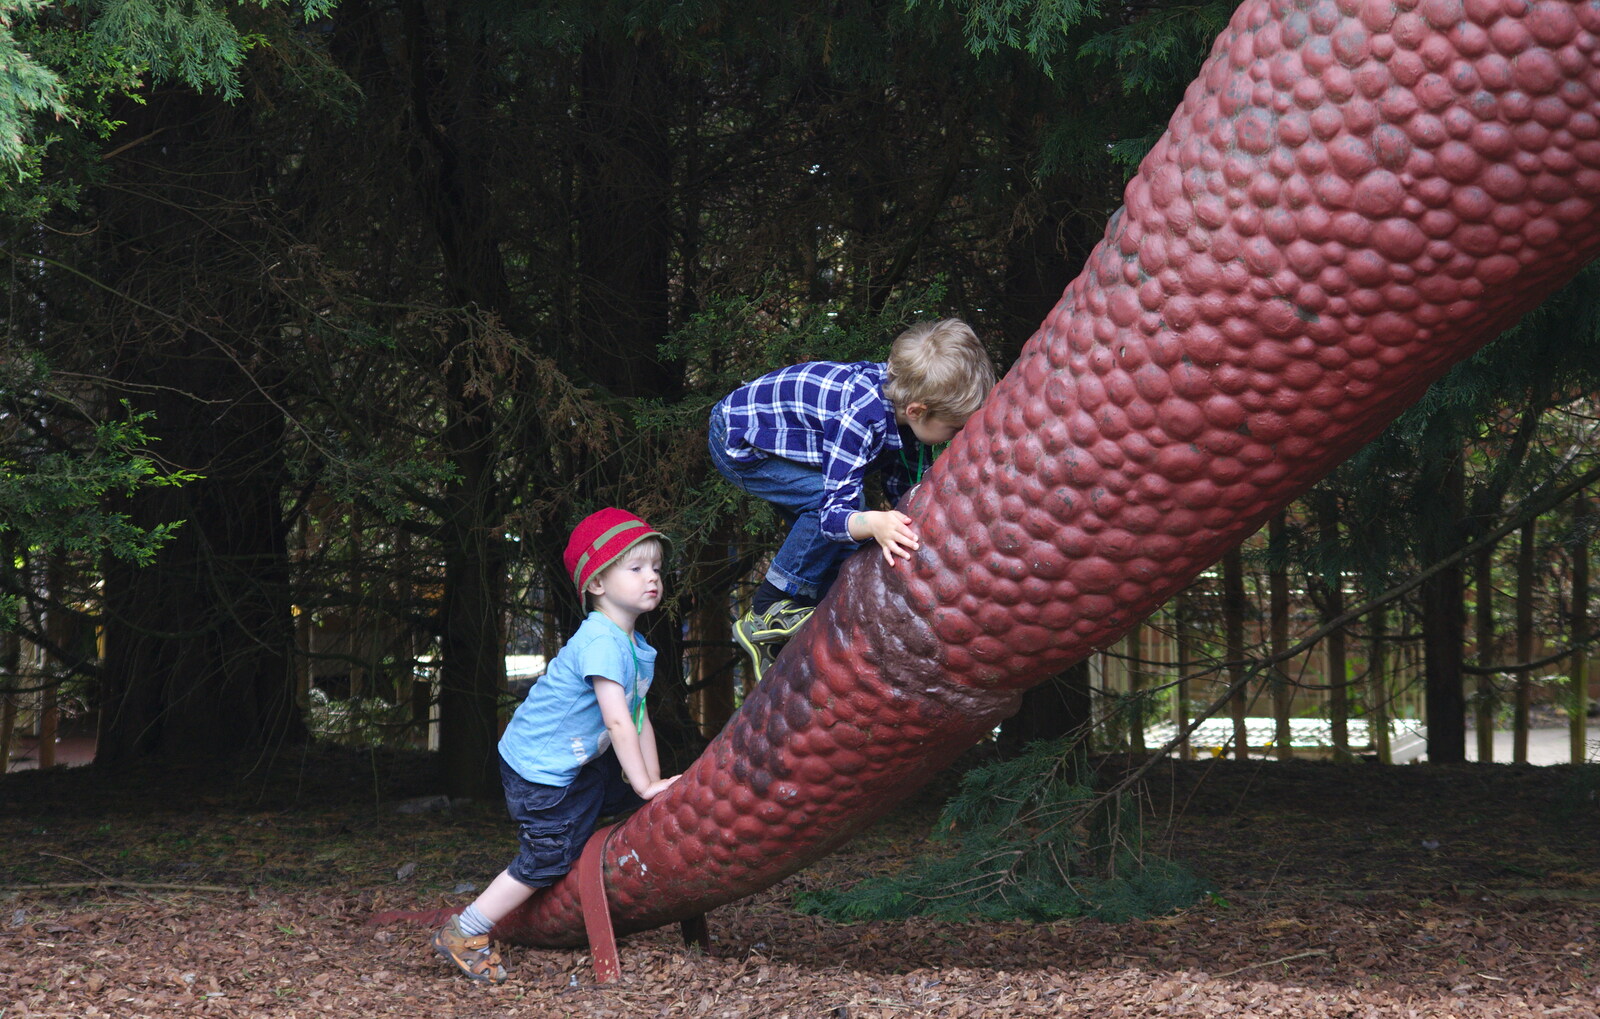 Fred and Harry climb the dinosaur tail from A Birthday Trip to the Zoo, Banham, Norfolk - 26th May 2014